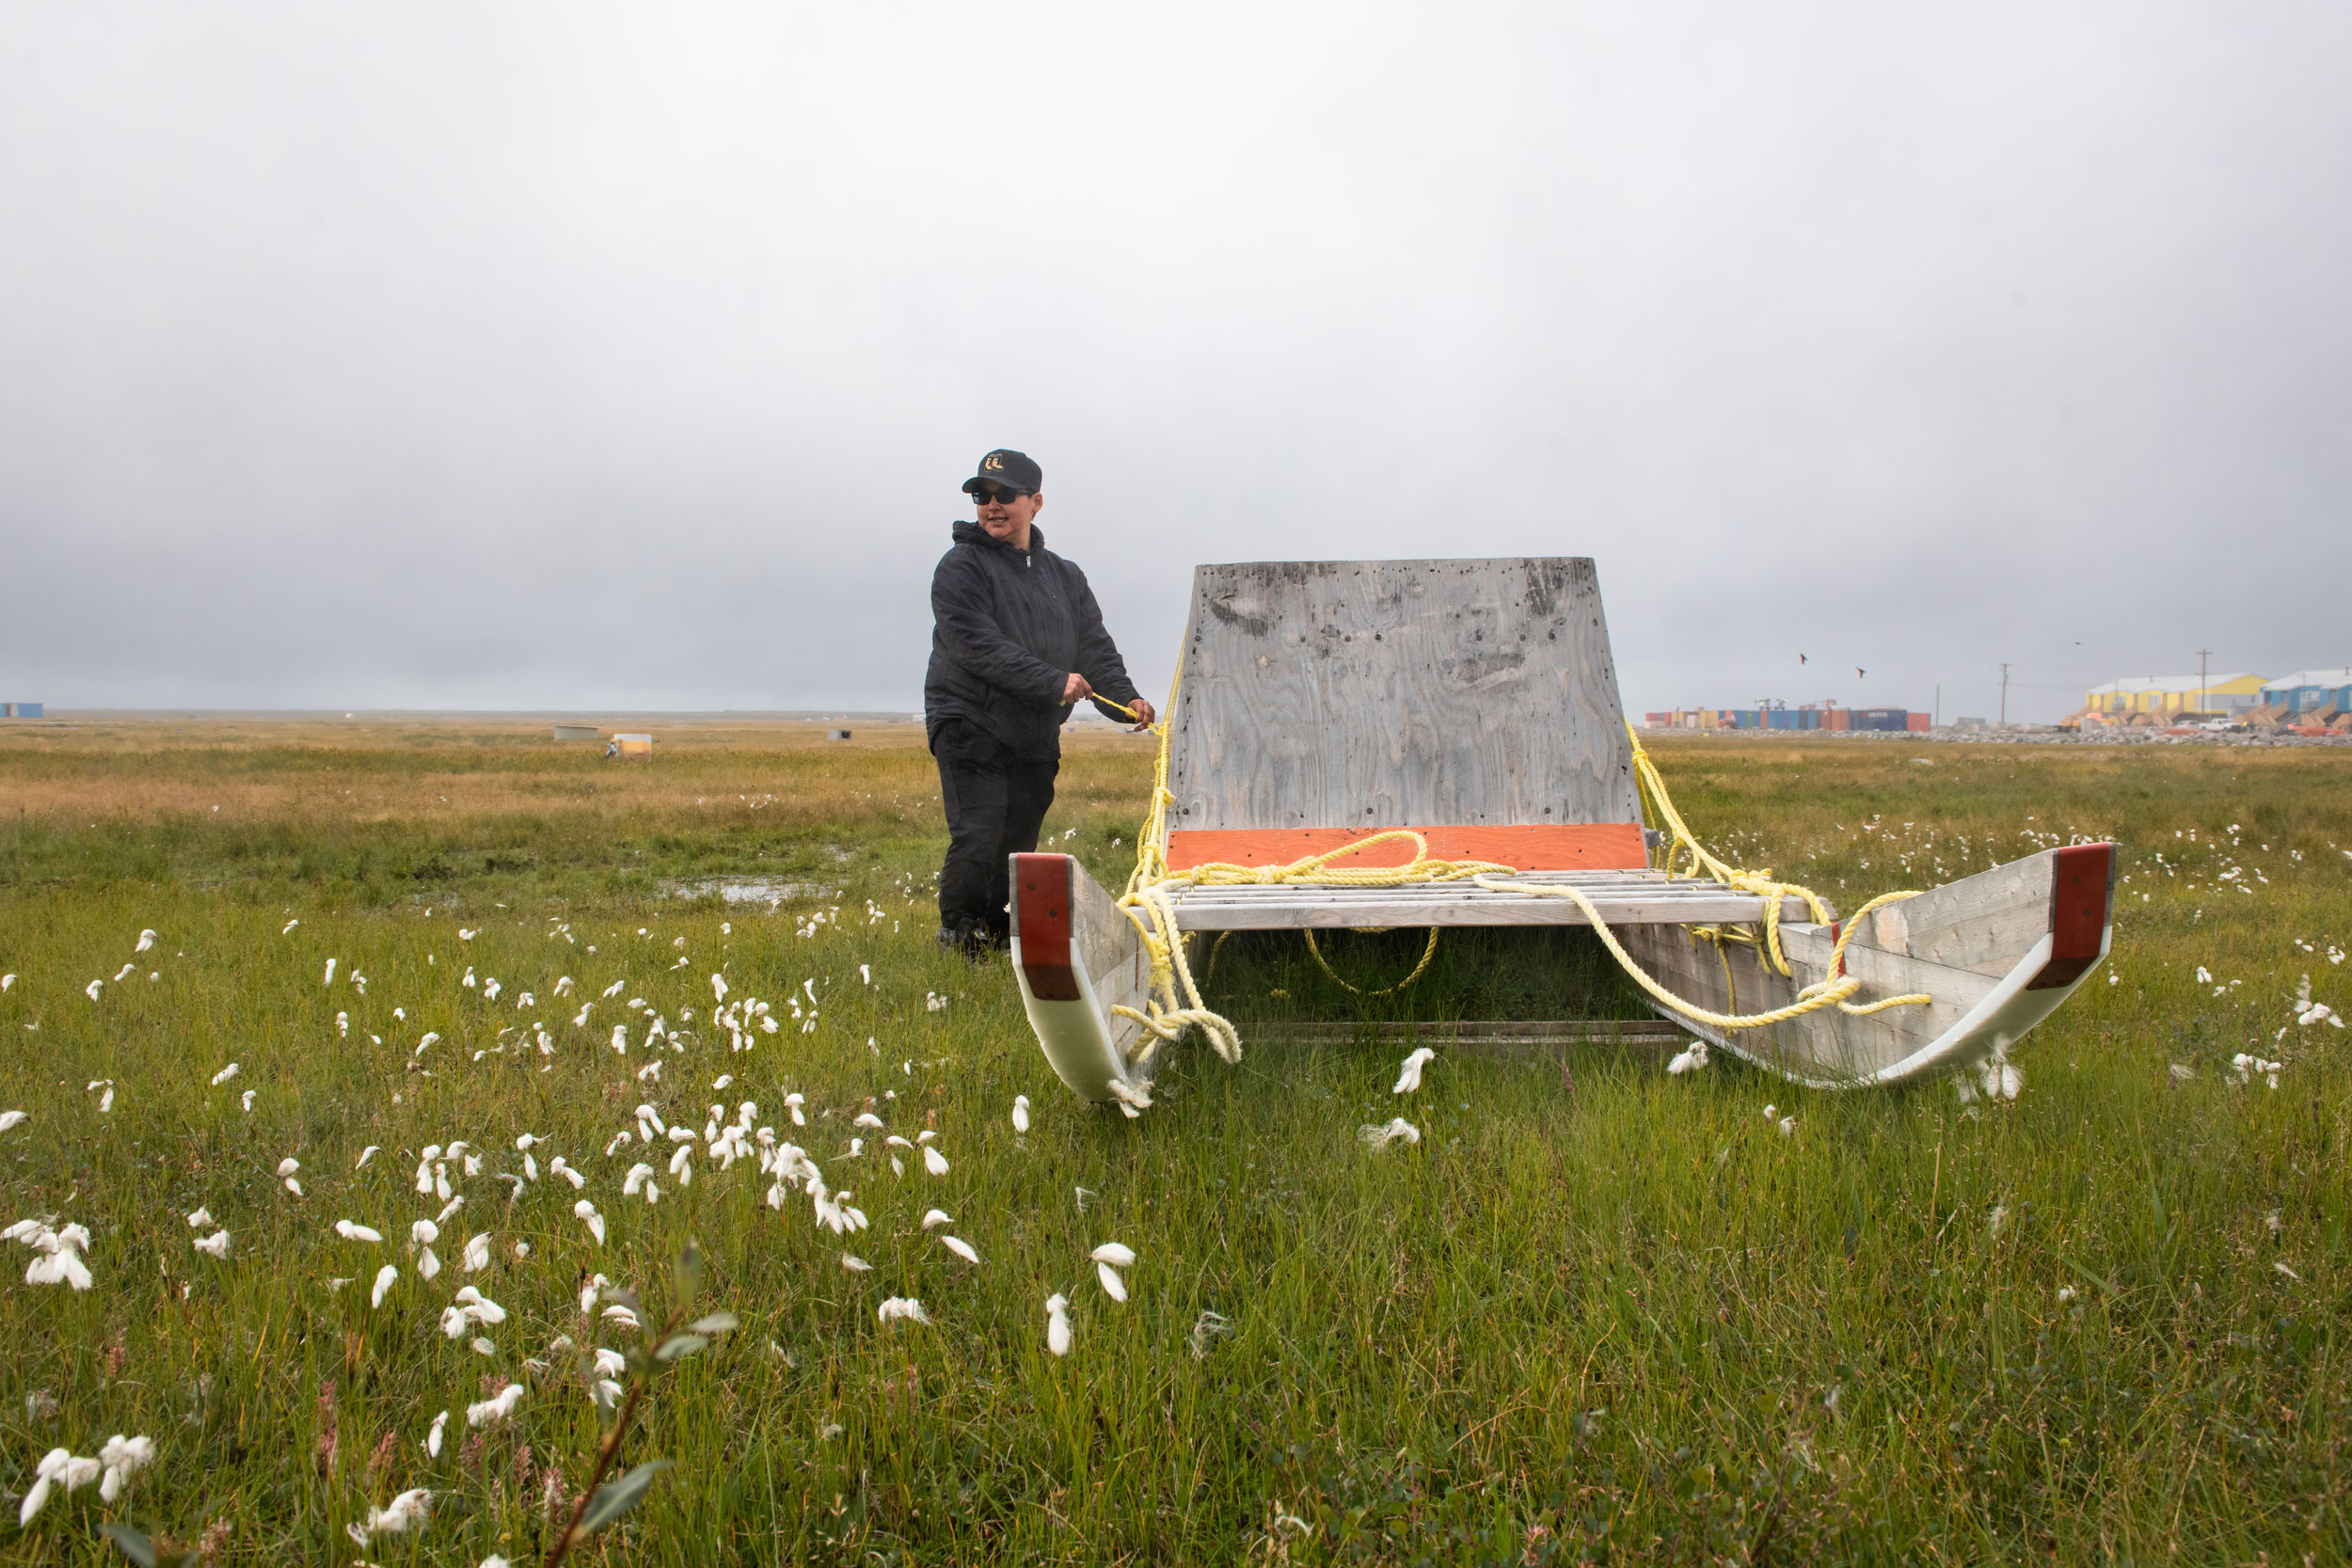 Irkok adjusts rope attached to a qamutik, a traditional wooden sled, in a field of cotton grass on the outskirts of Arviat.